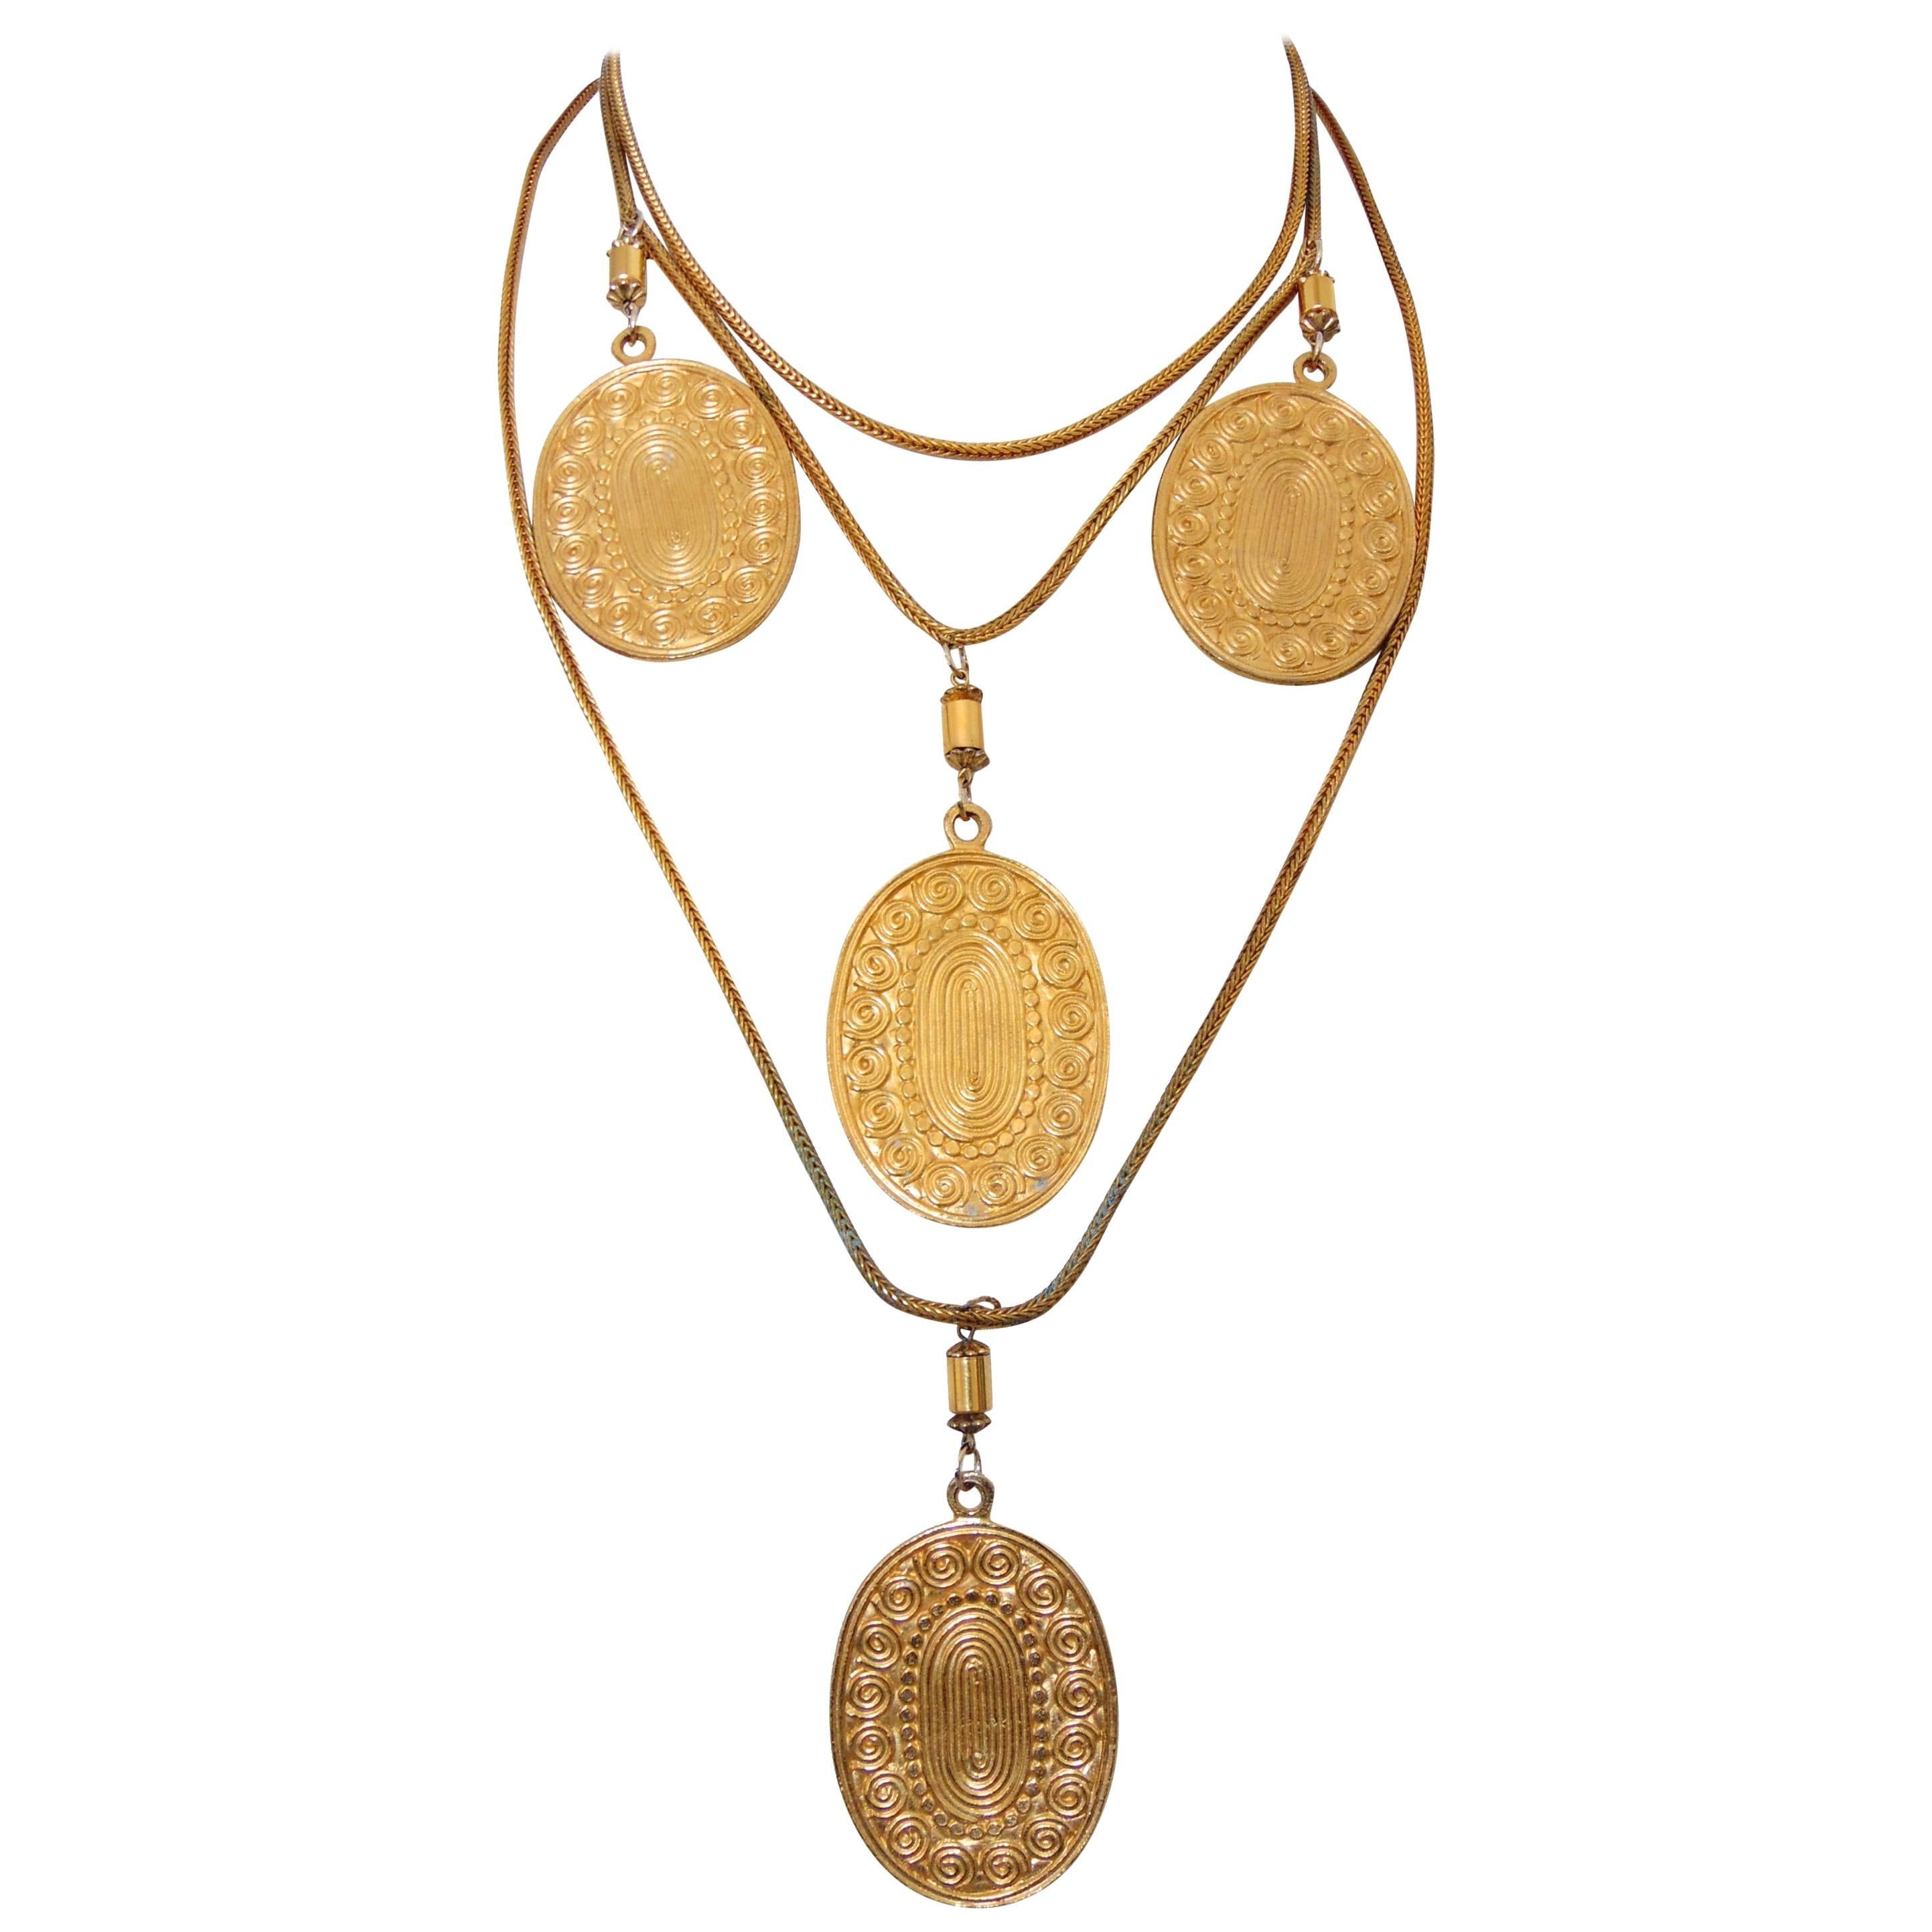 Yves Saint Laurent Gypsy Coin Necklace Gold Metal Runway 1970s